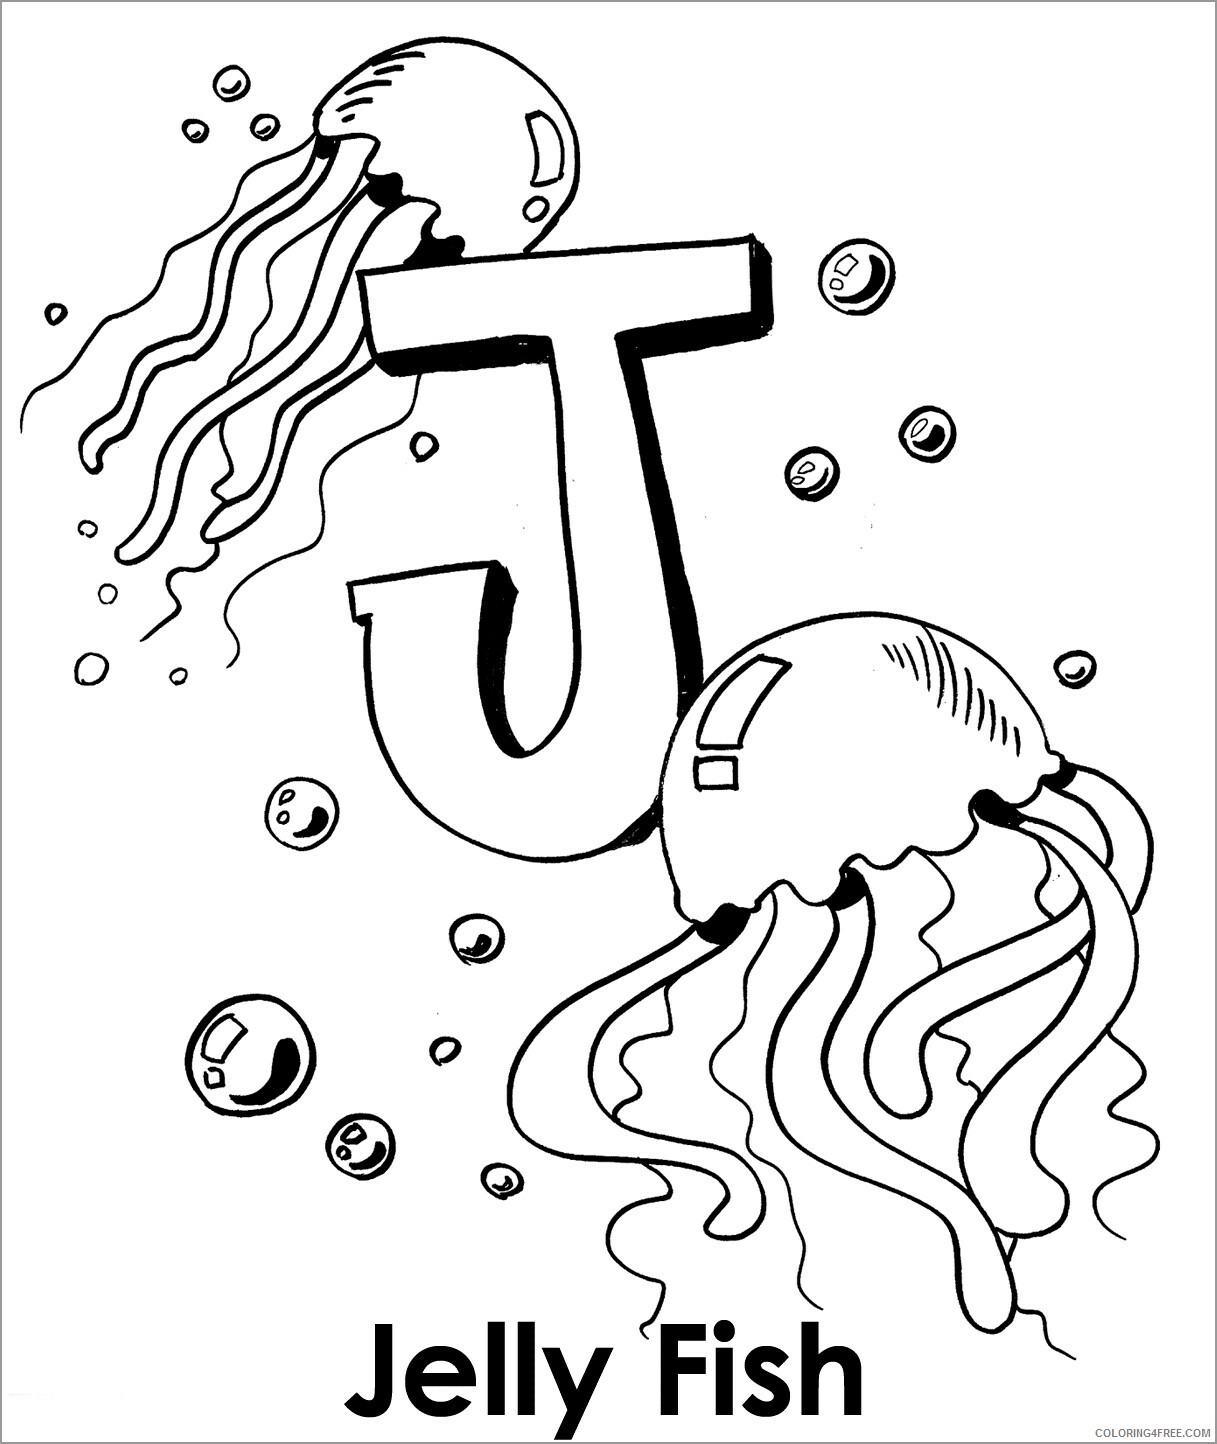 Fish Coloring Pages Animal Printable Sheets j for jellyfish 2021 2108 Coloring4free